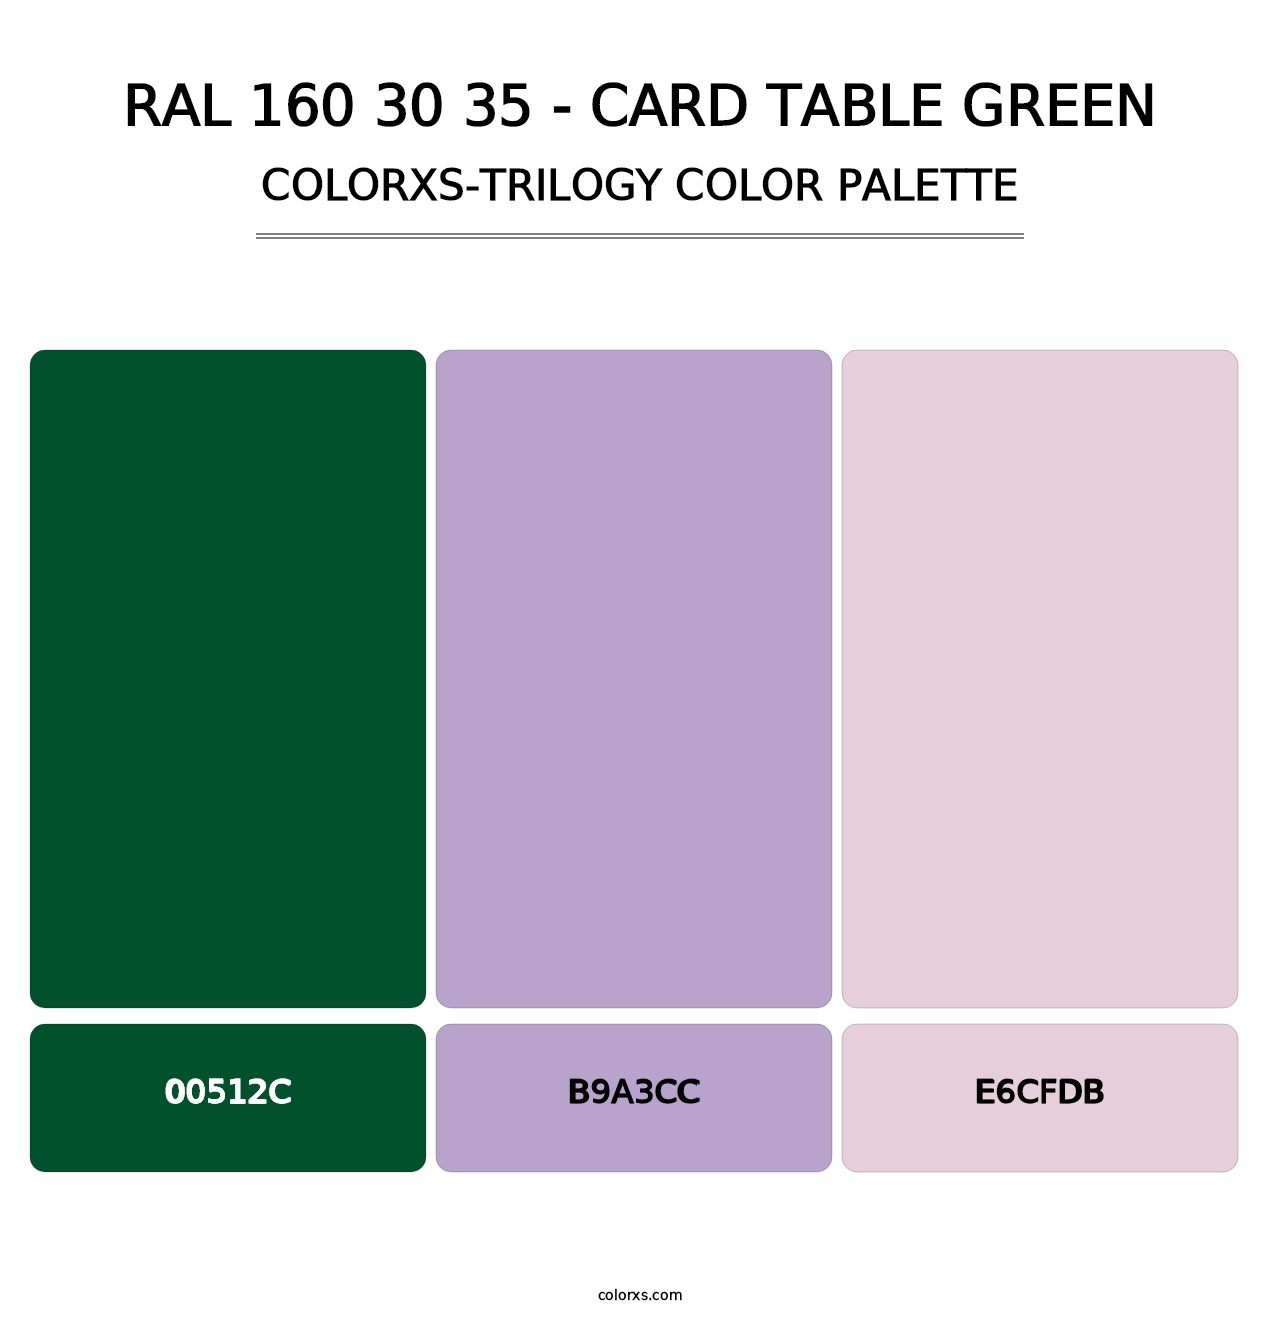 RAL 160 30 35 - Card Table Green - Colorxs Trilogy Palette